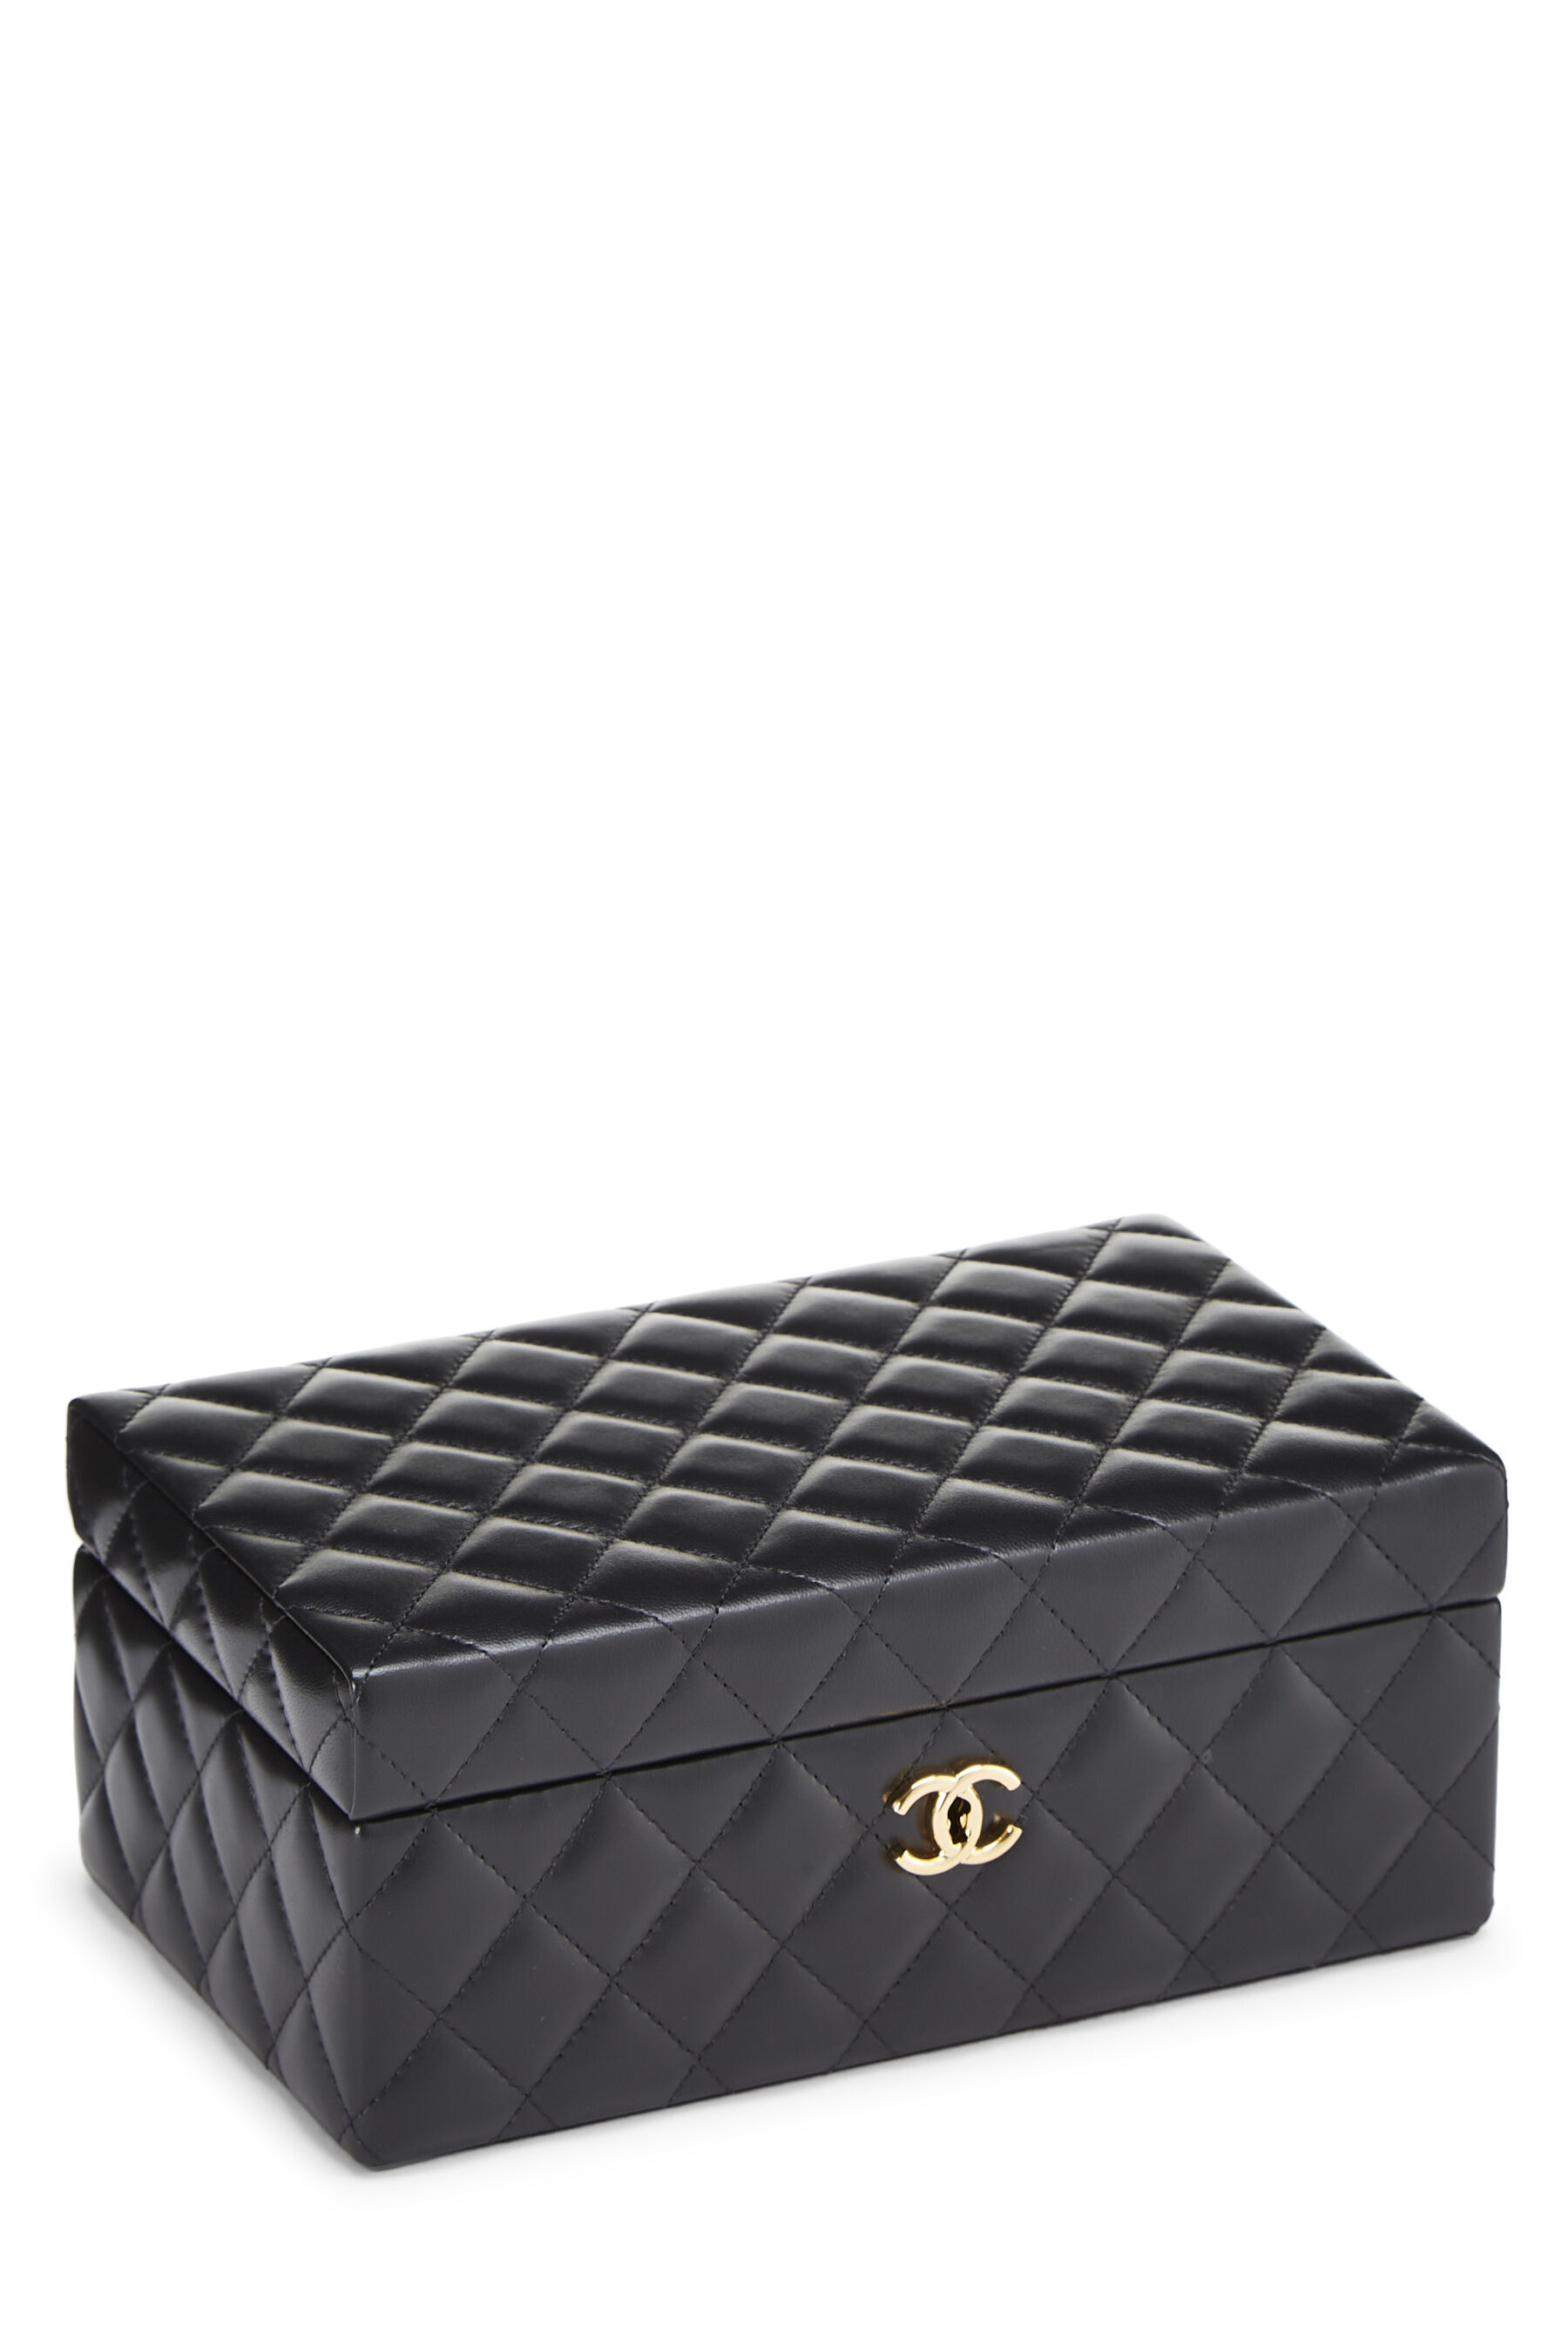 Europe Chanel Bag Price List Reference Guide 2022 Update  Spotted Fashion